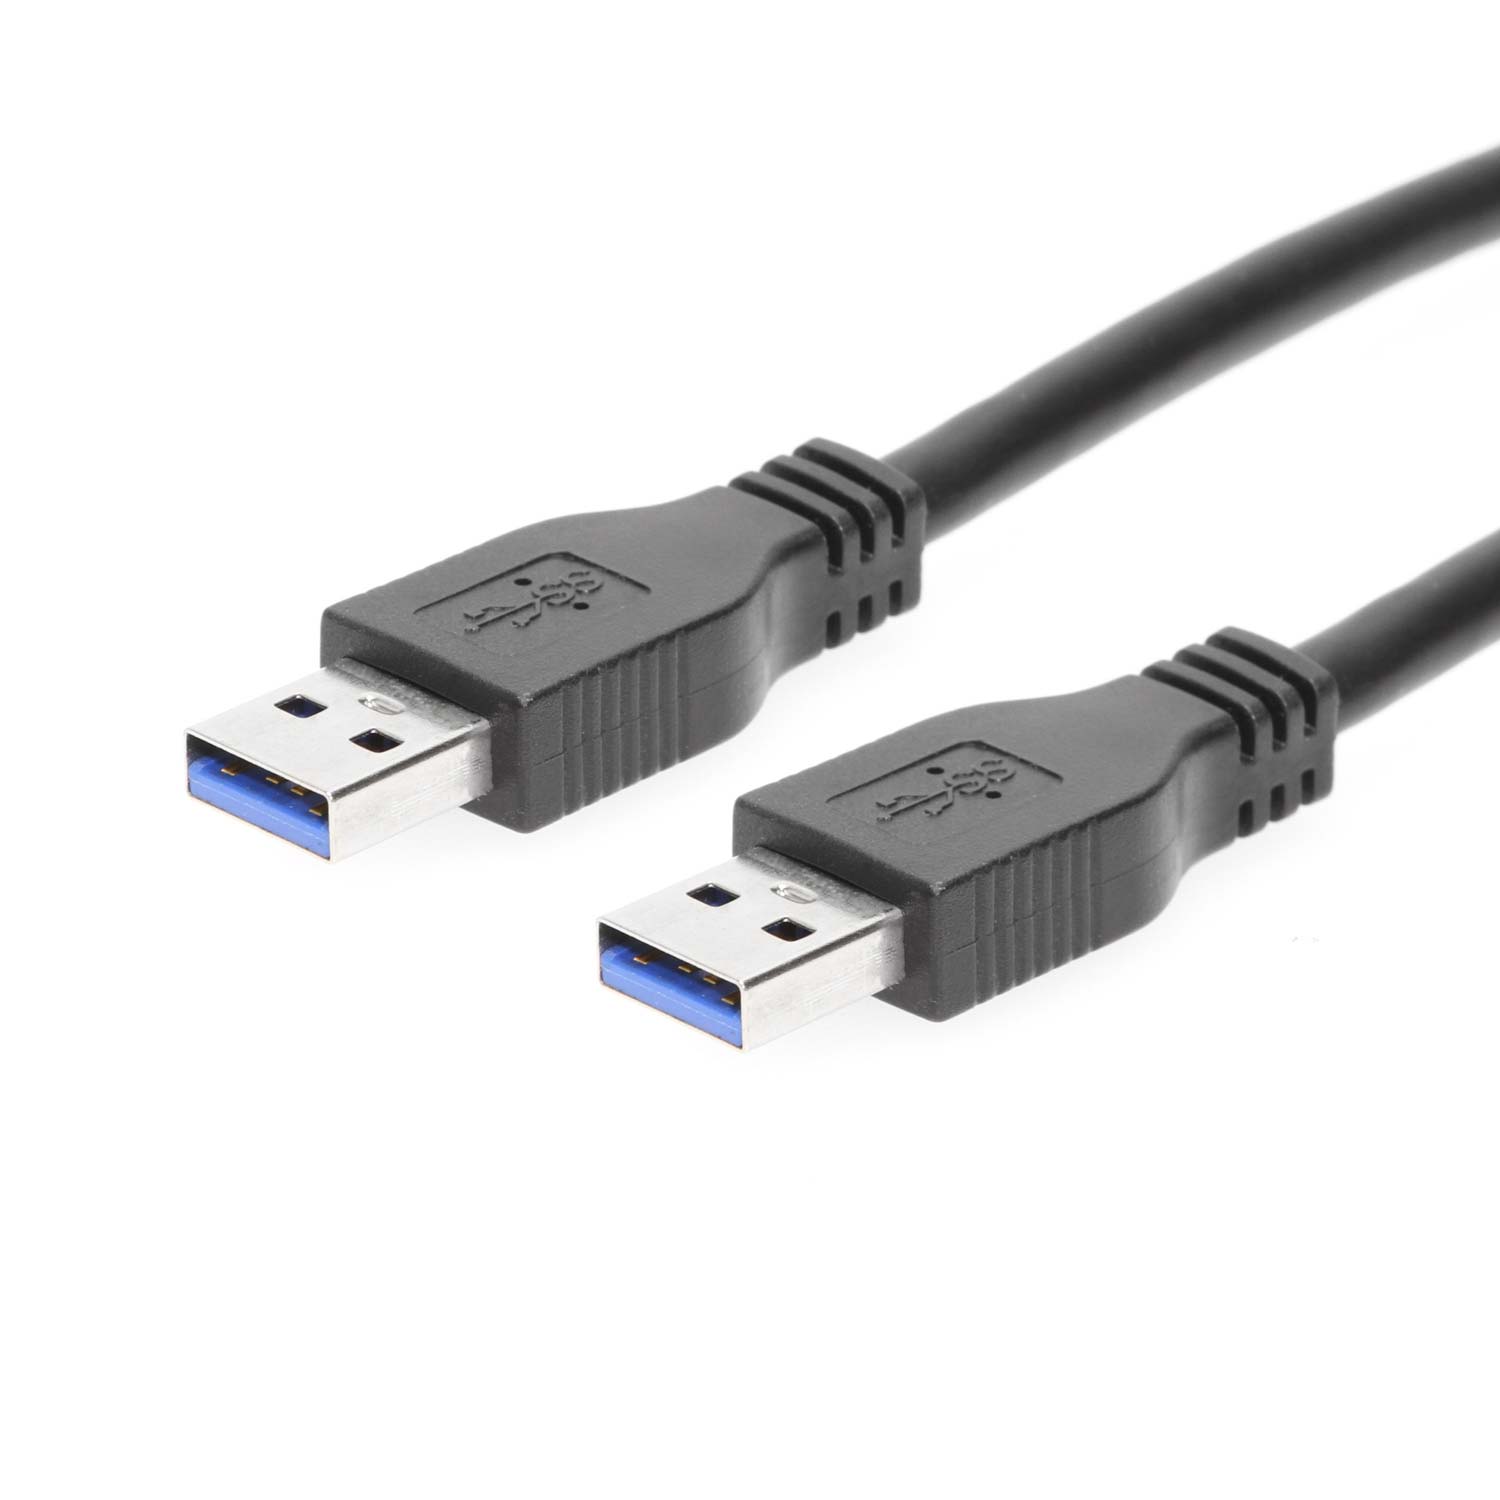 USBGear 12 inch USB 3.0 Cable A-Male to A-Male Cable